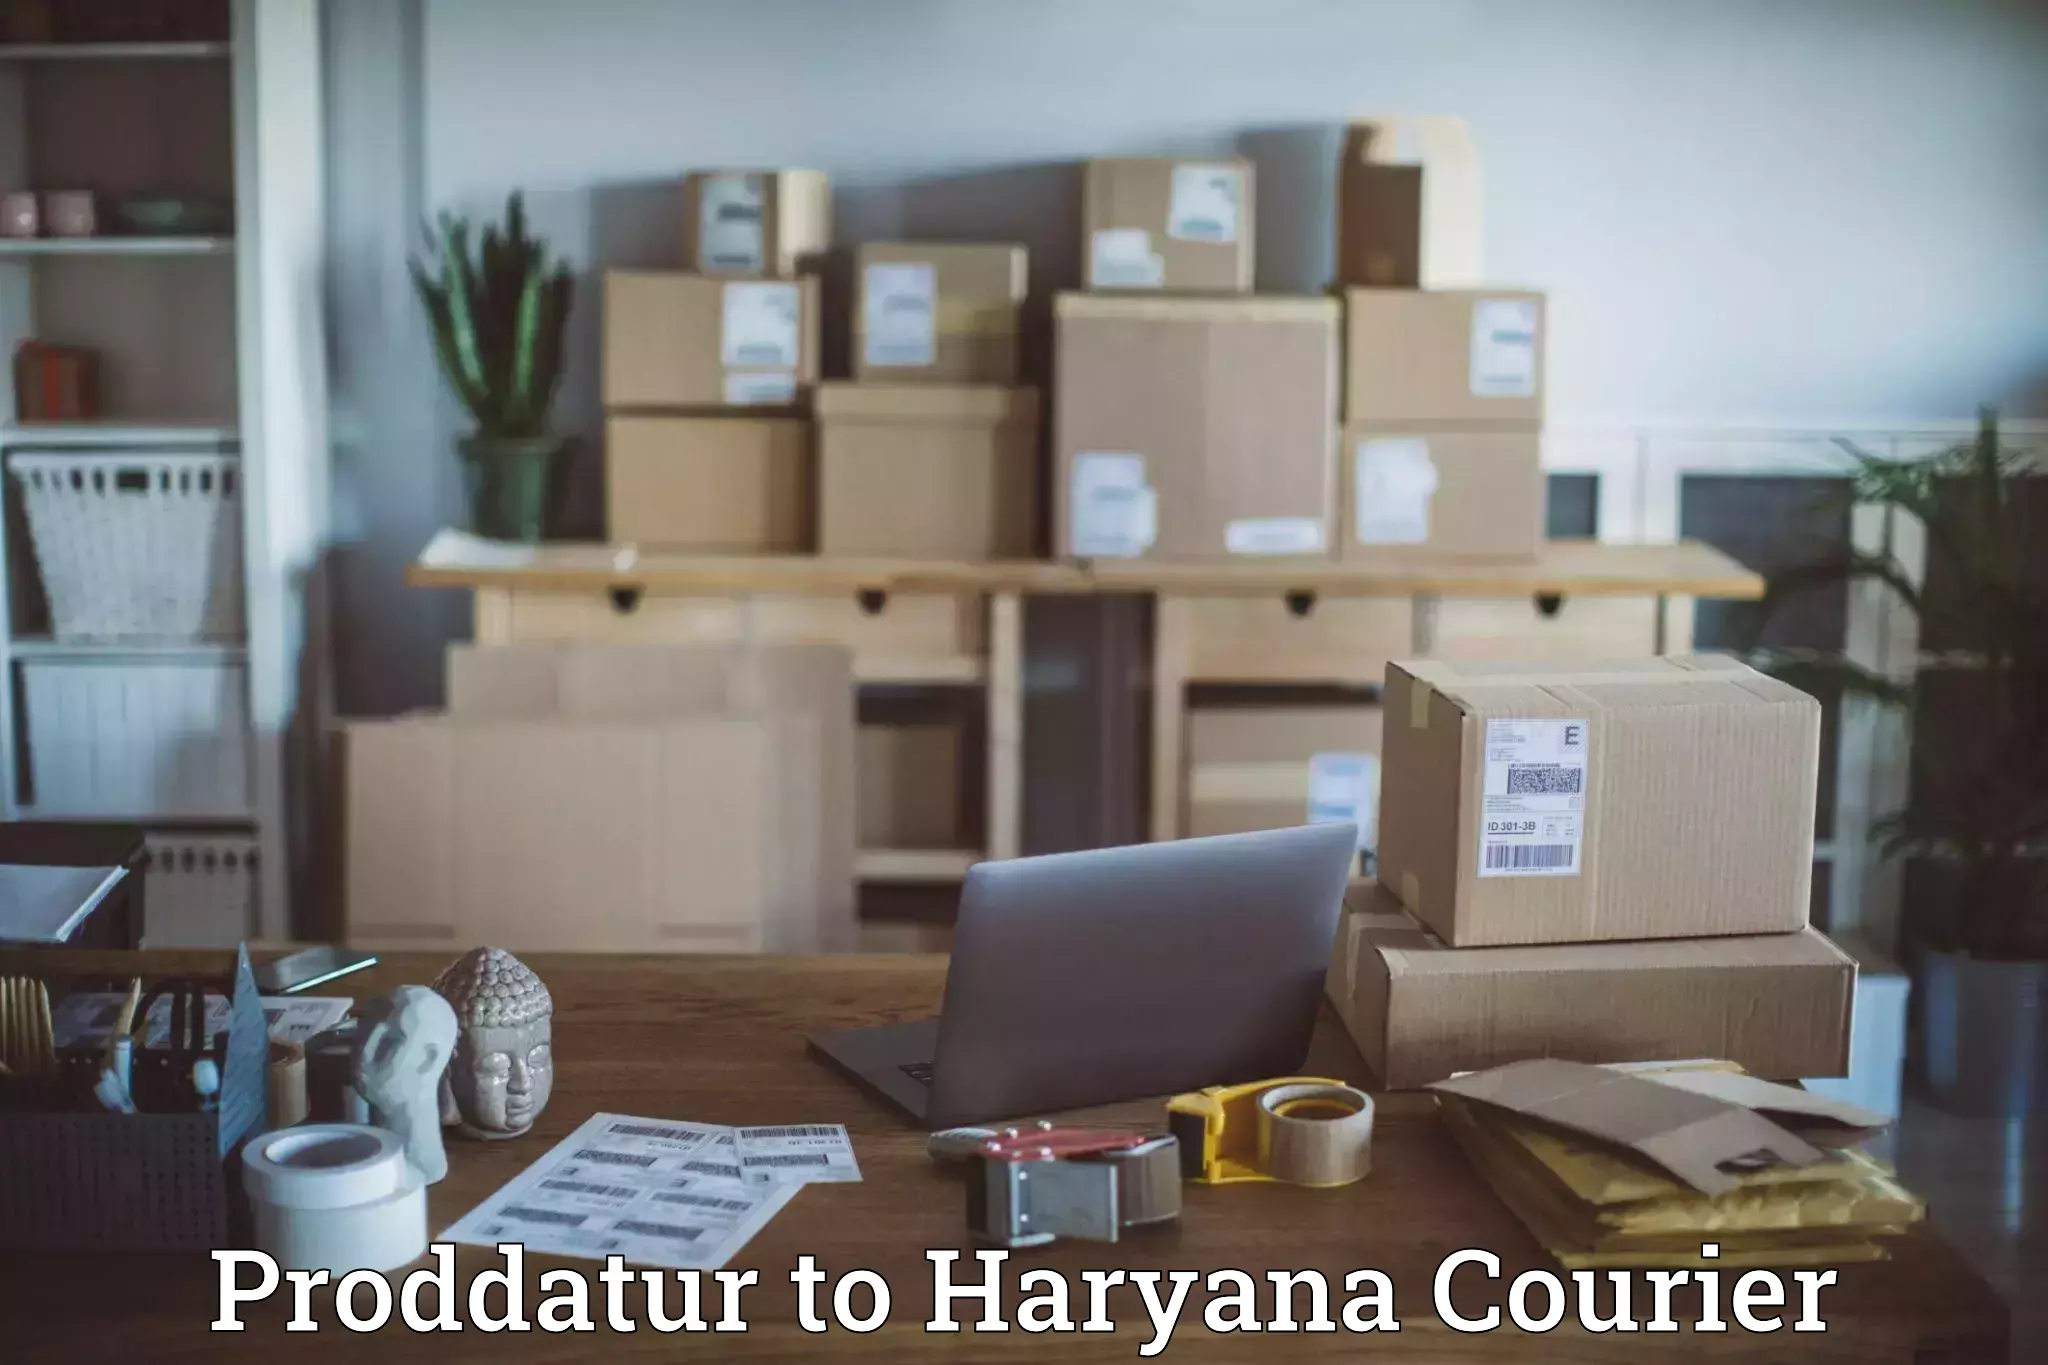 Fast shipping solutions Proddatur to Chaudhary Charan Singh Haryana Agricultural University Hisar